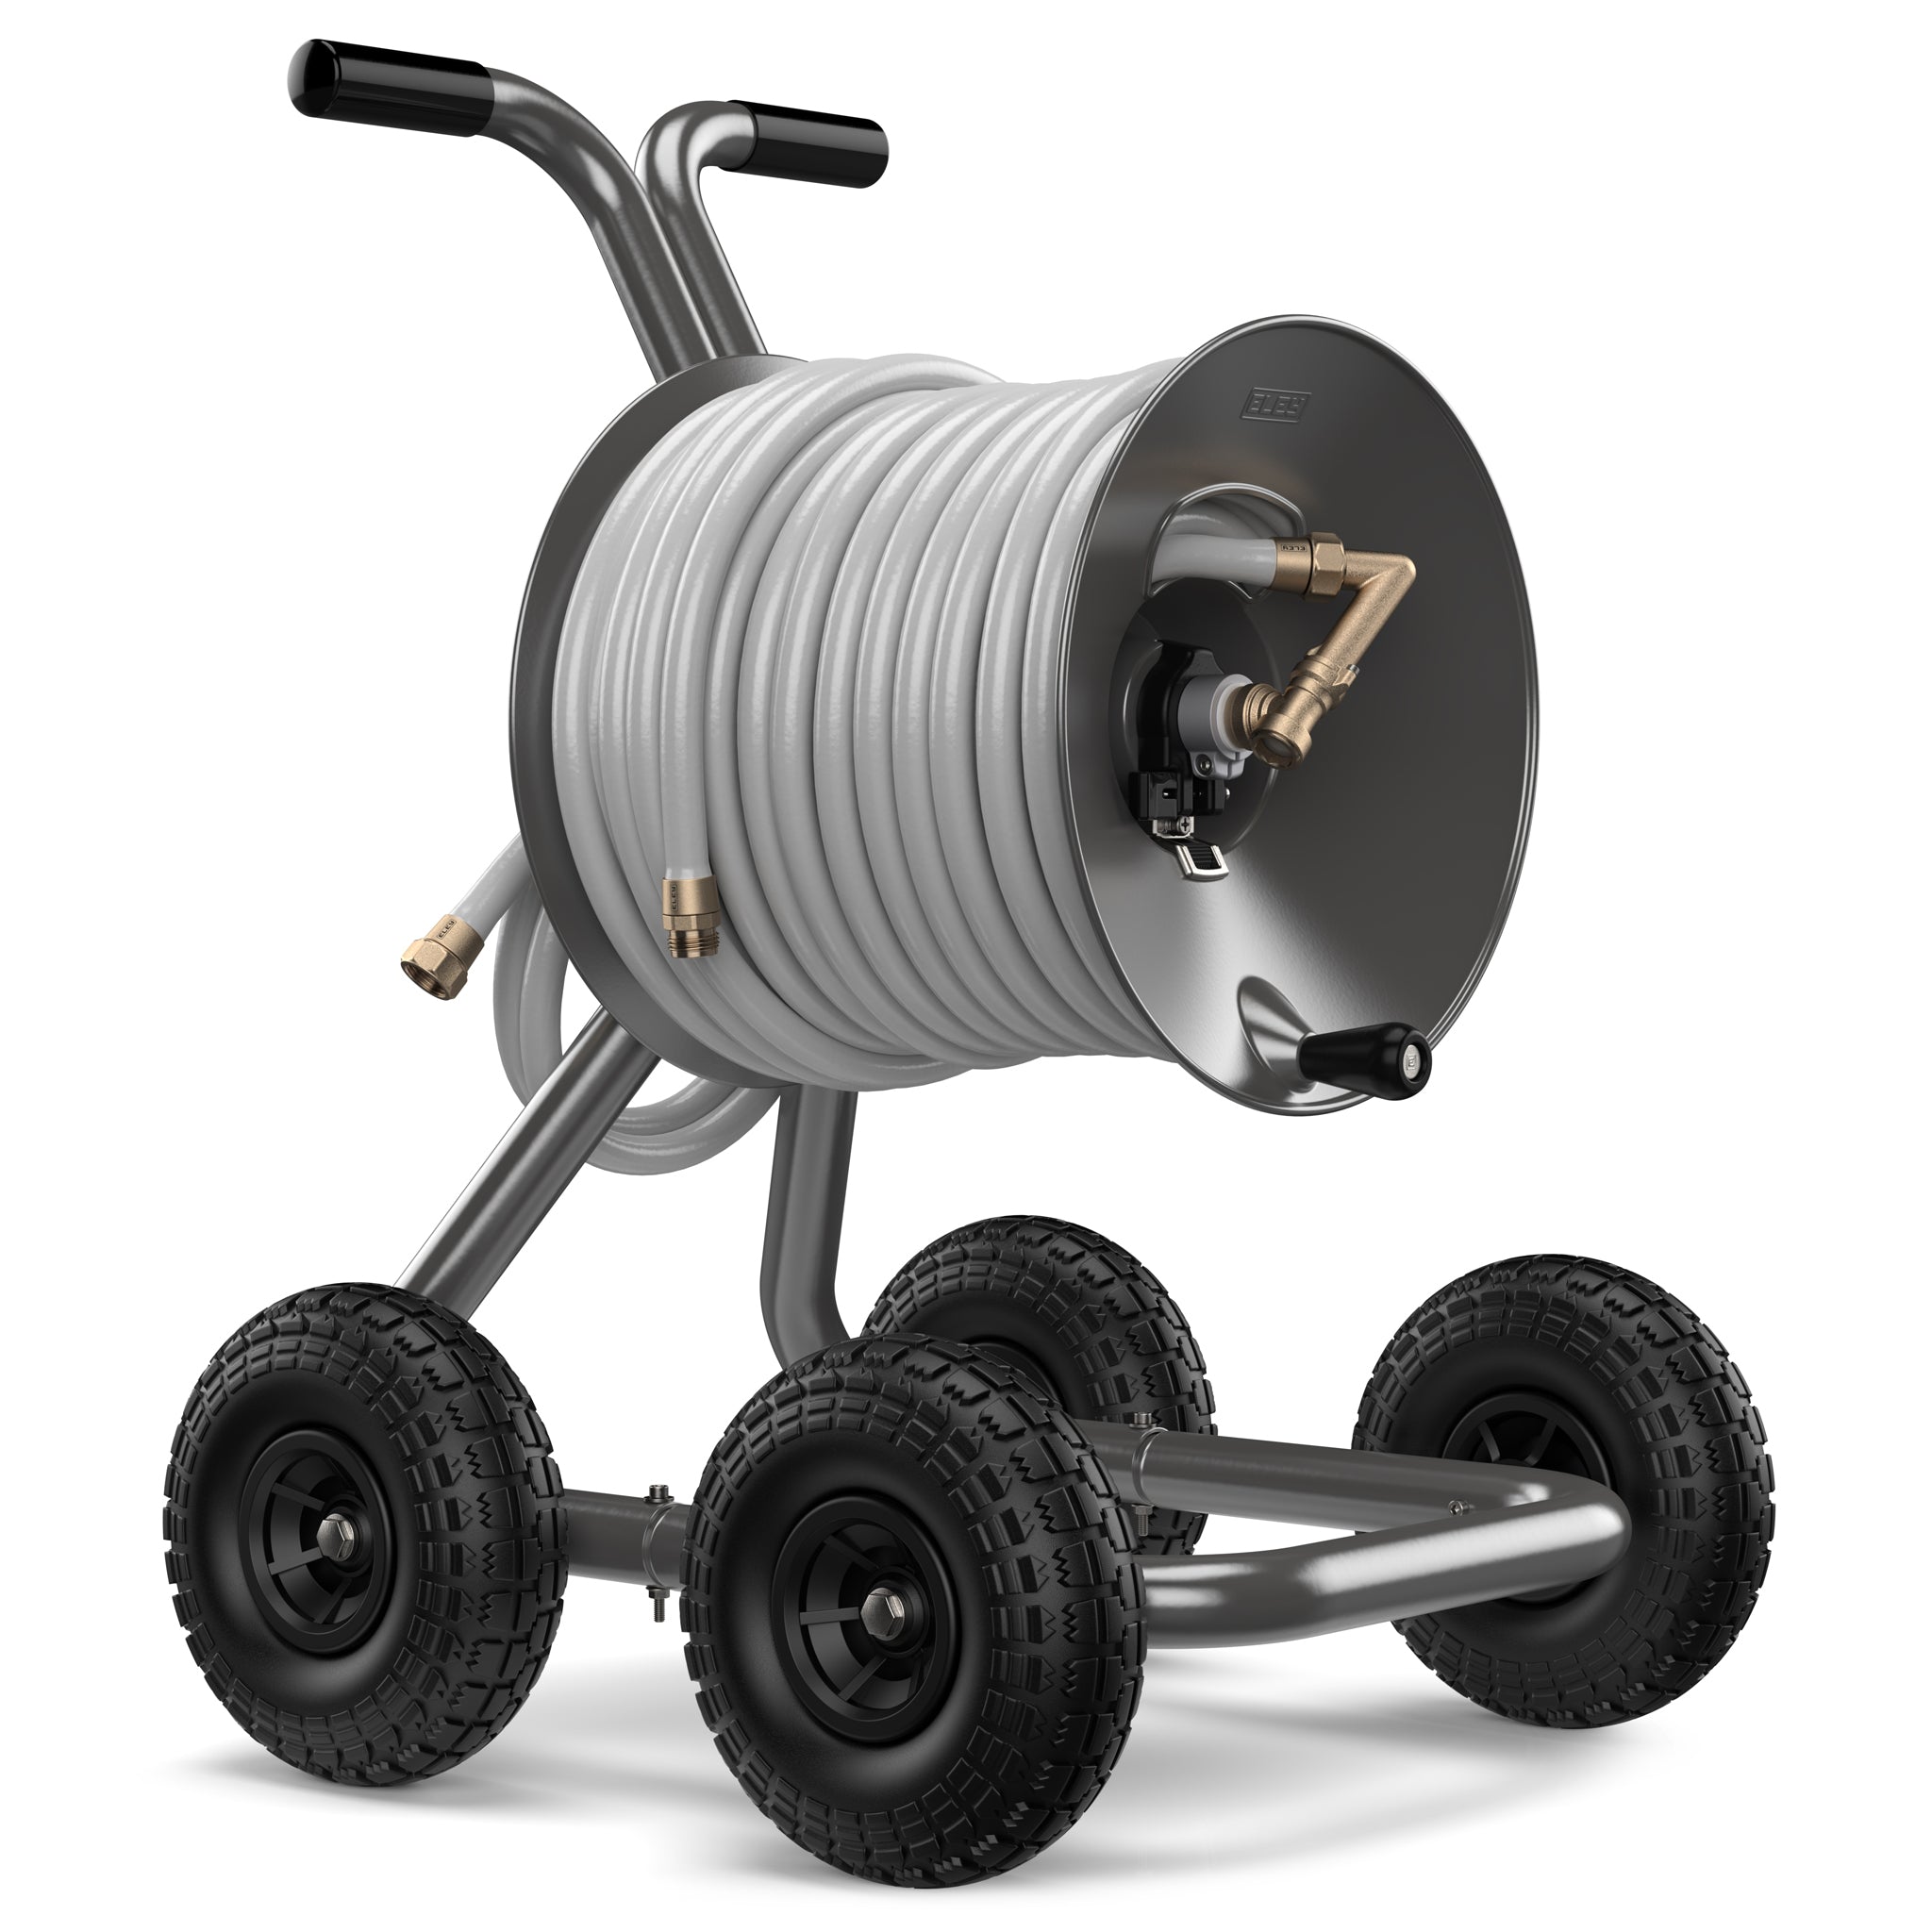 Eley 4-wheel wagon portable garden hose reel model 1043QX equipped with Item 1044 Extra-Capacity Kit loaded with 175-feet of Eley 5/8-inch Polyurethane garden hose, diametric view